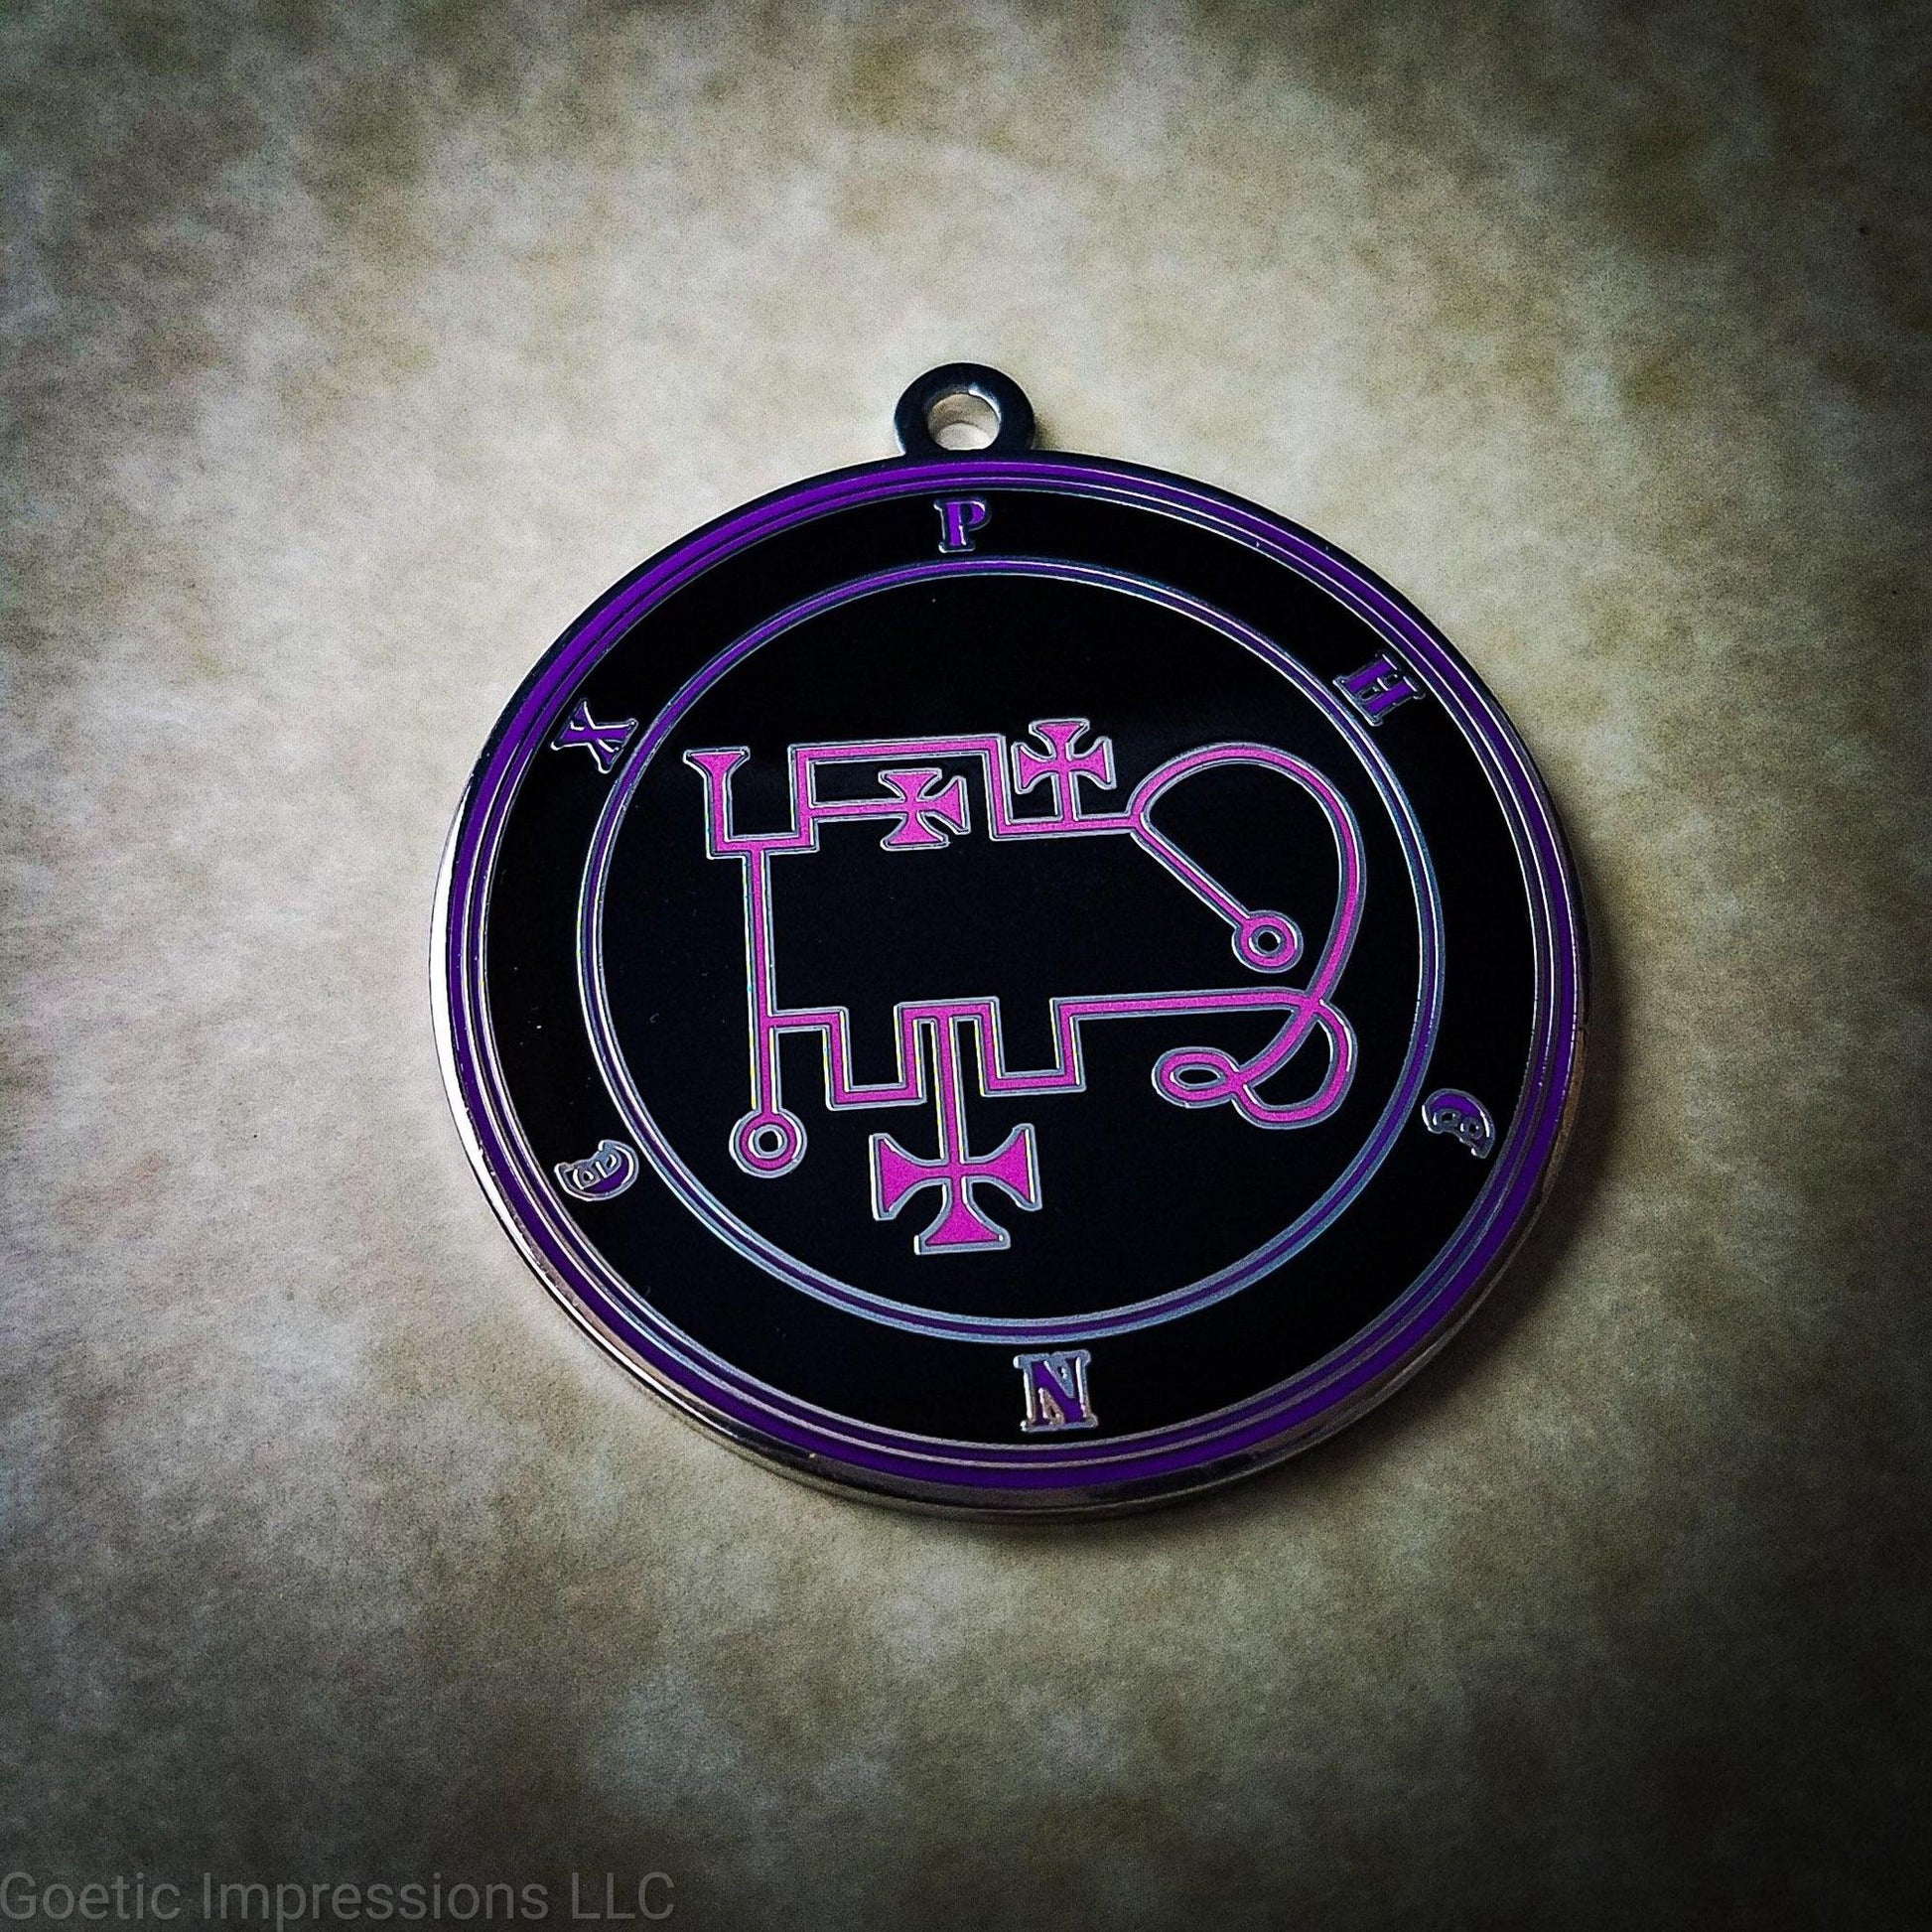 Talisman of goetic spirit Phenex. Phenex's sigil is pink with the circles surrounding in purple along with the name on a black background. 